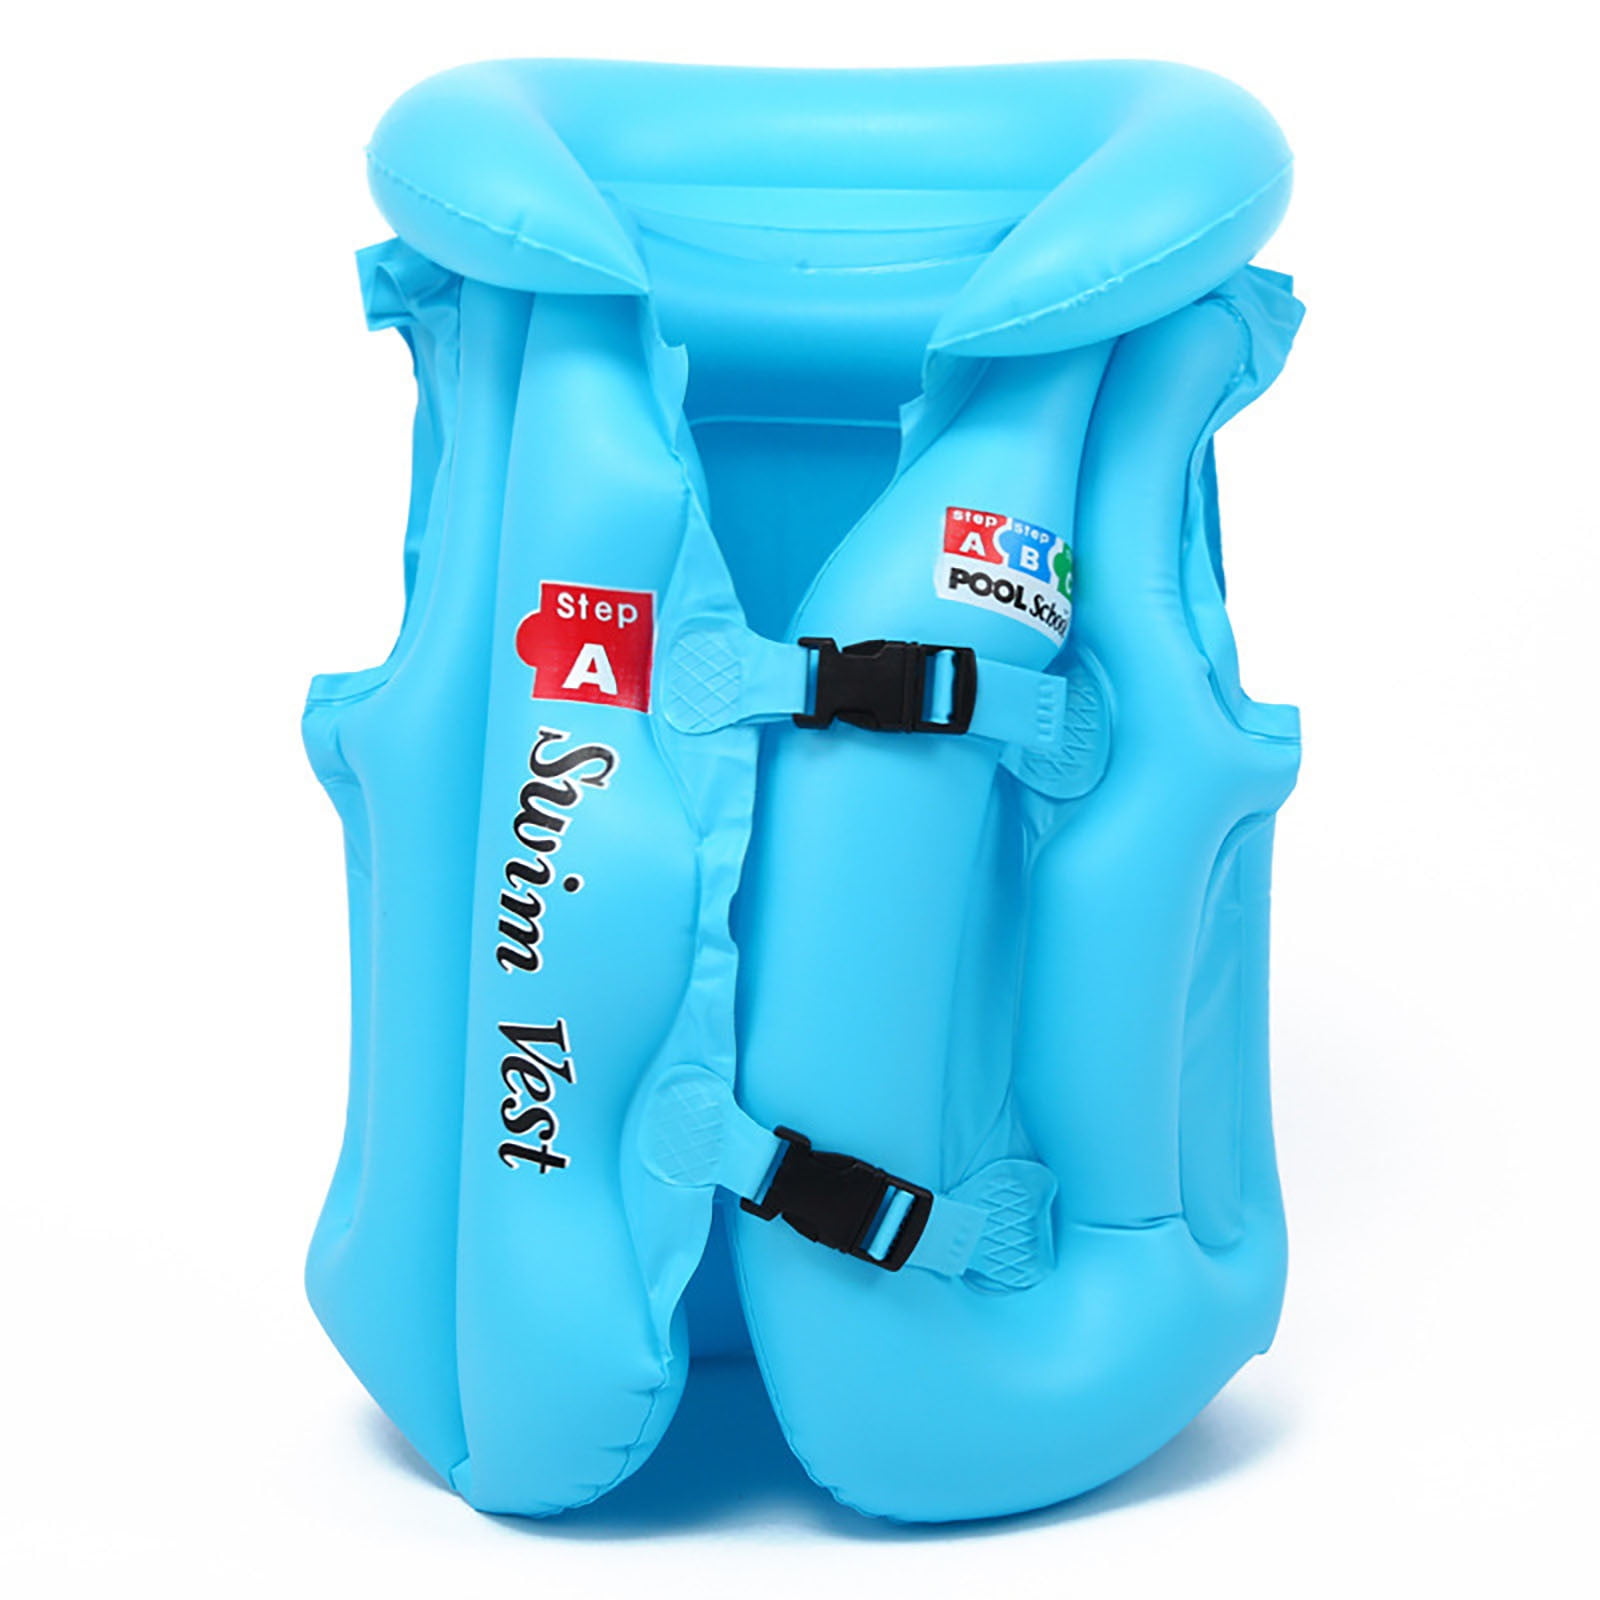 Apmemiss Best Baby Gifts Clearance Children's Life Jacket